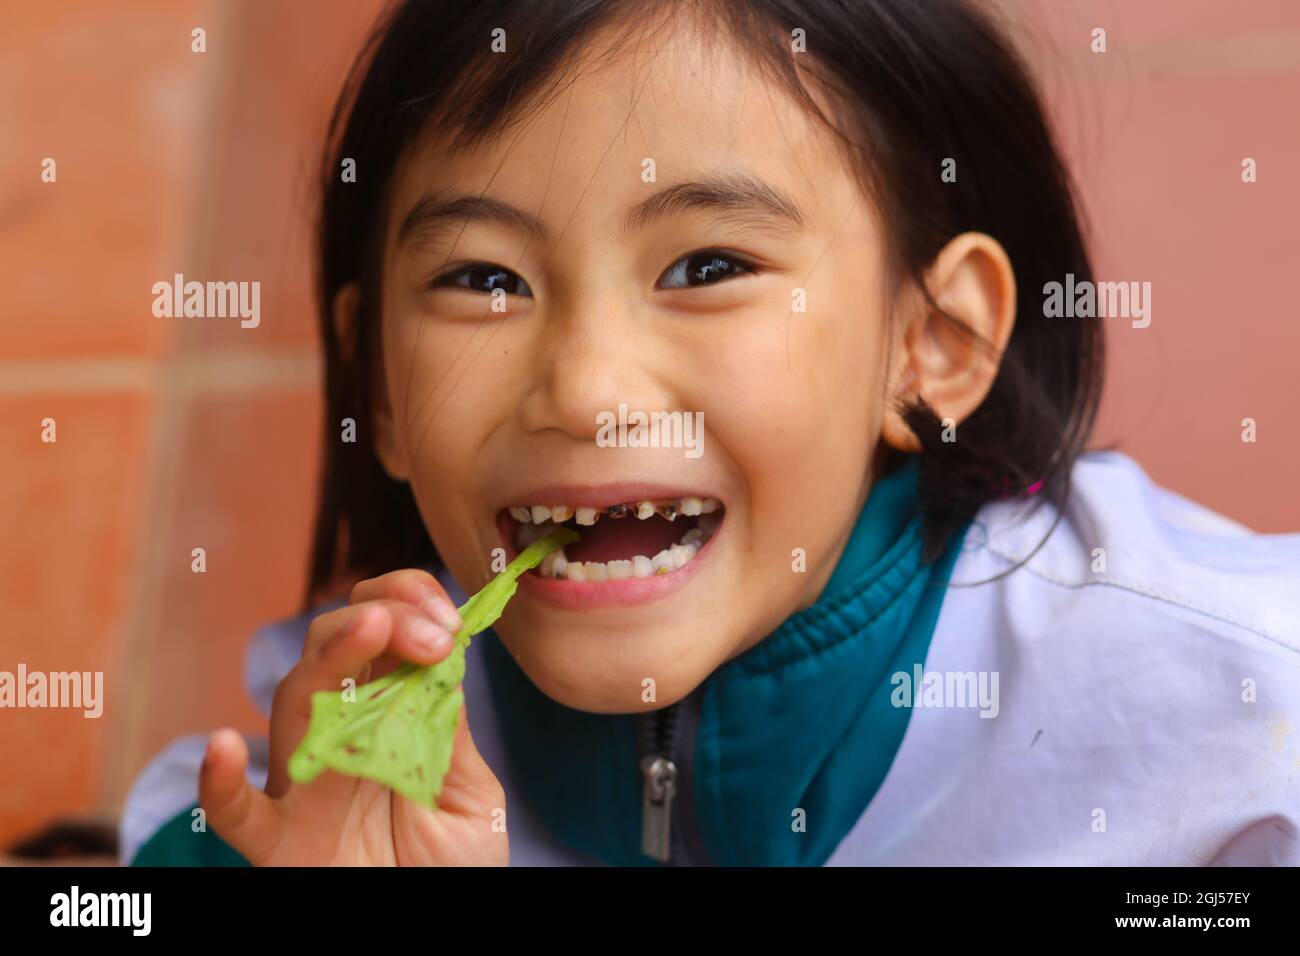 a young little girl is laughing with decayed teeth and leaf mustard on her hand Stock Photo